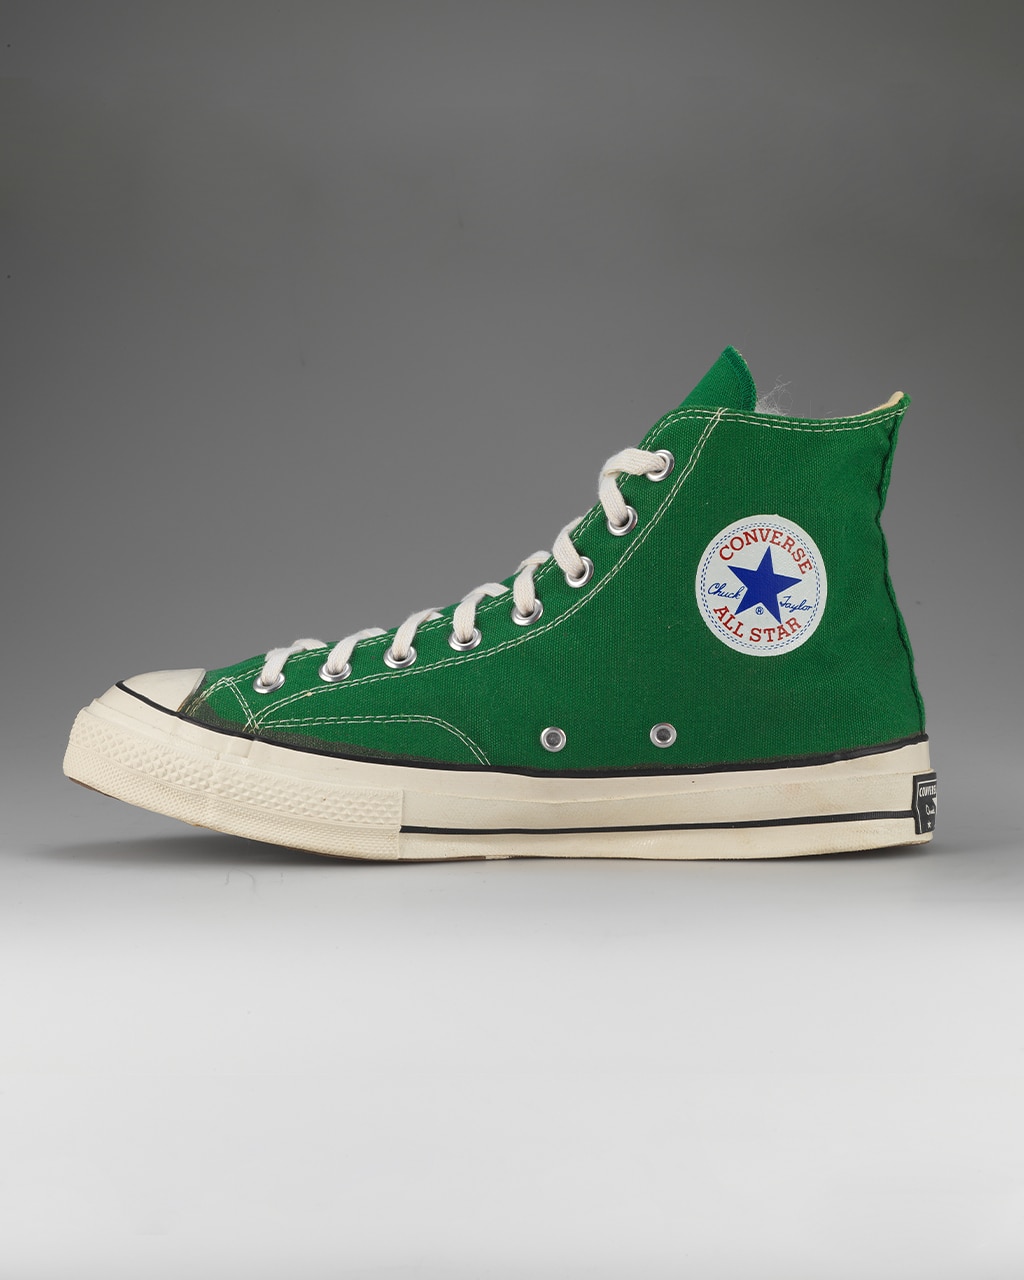 list of all converse shoes ever made